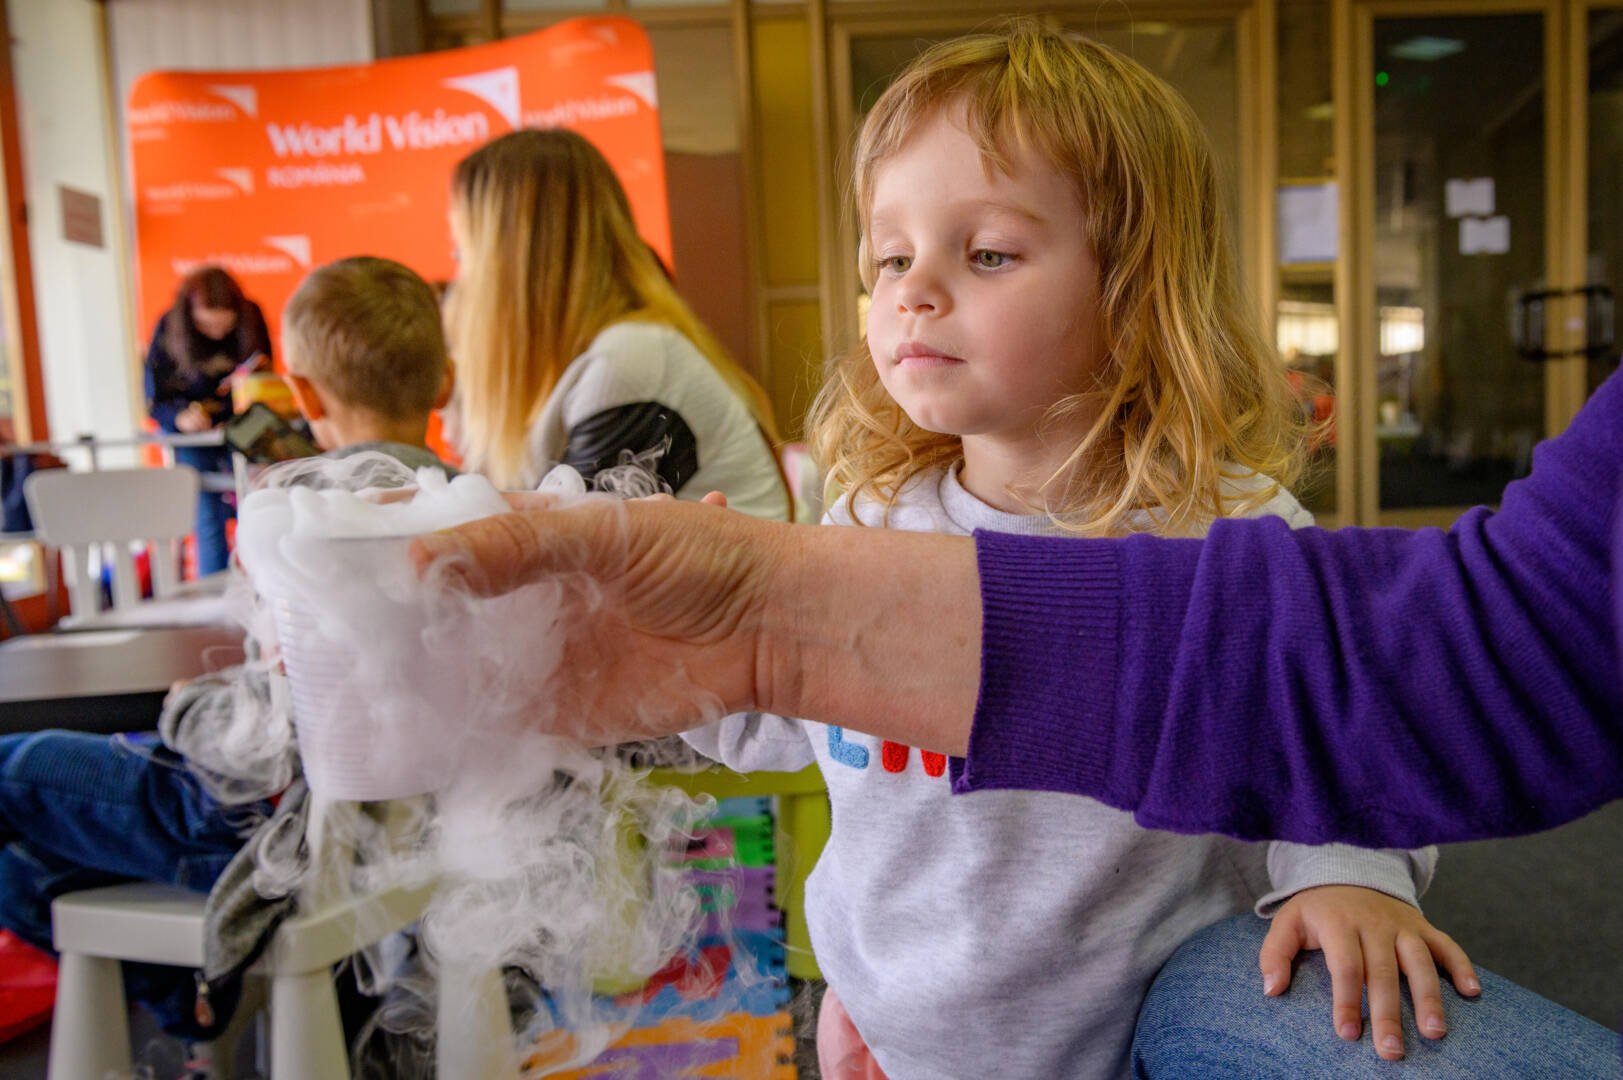 A little girl looks at dry ice in a cup her grandmother holds. Behind her is a World Vision banner in the child-safe play area.